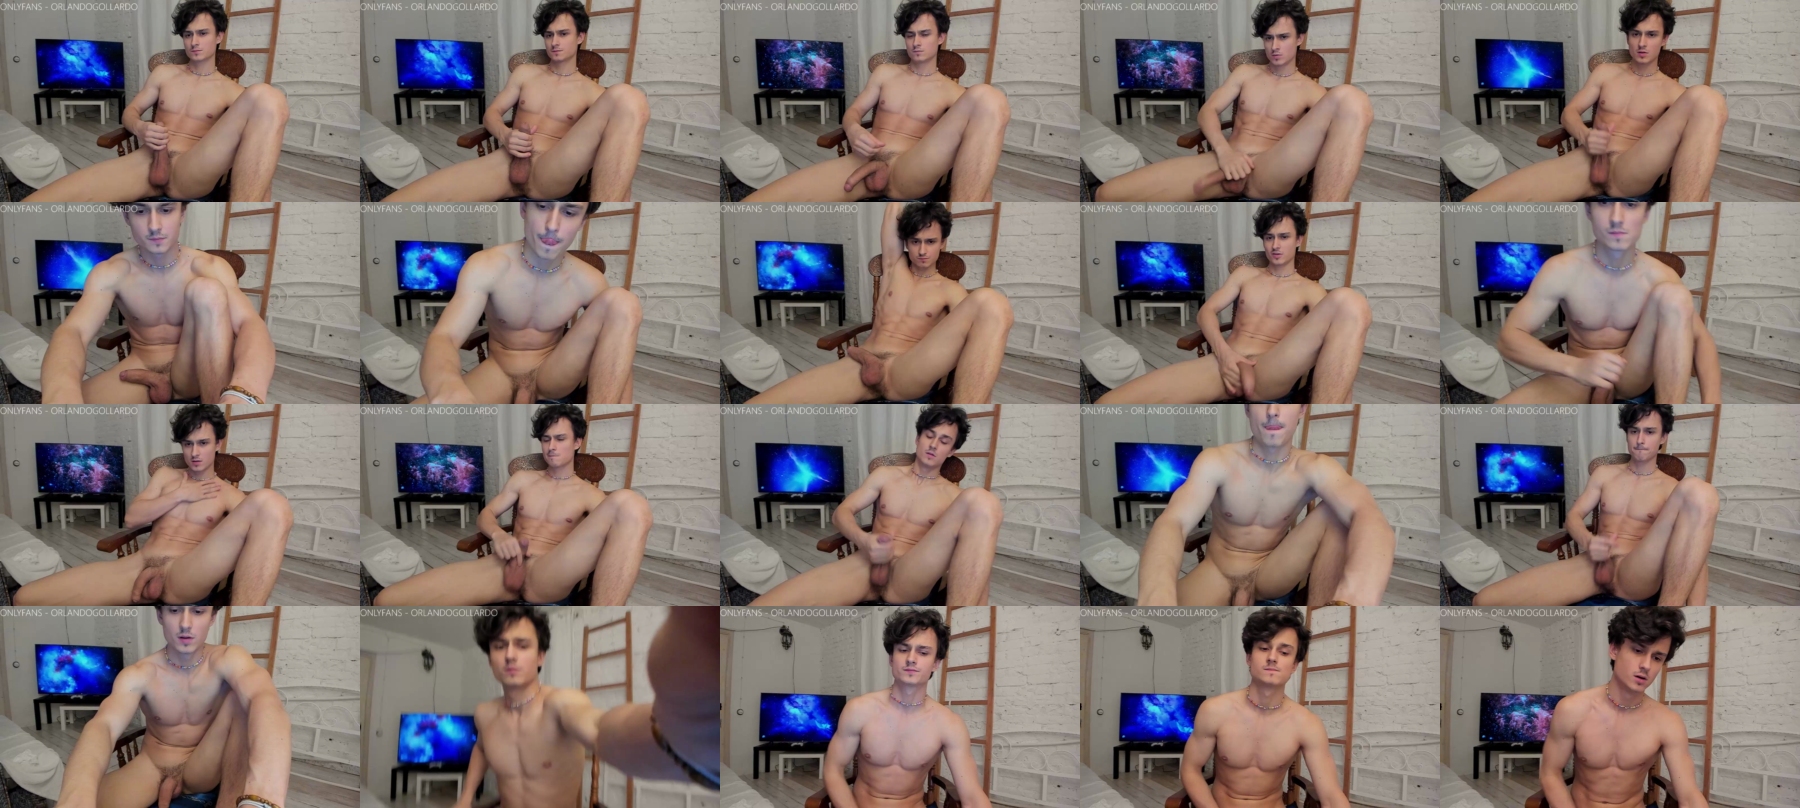 Orlando__Bloom Topless CAM SHOW @ Chaturbate 02-10-2021